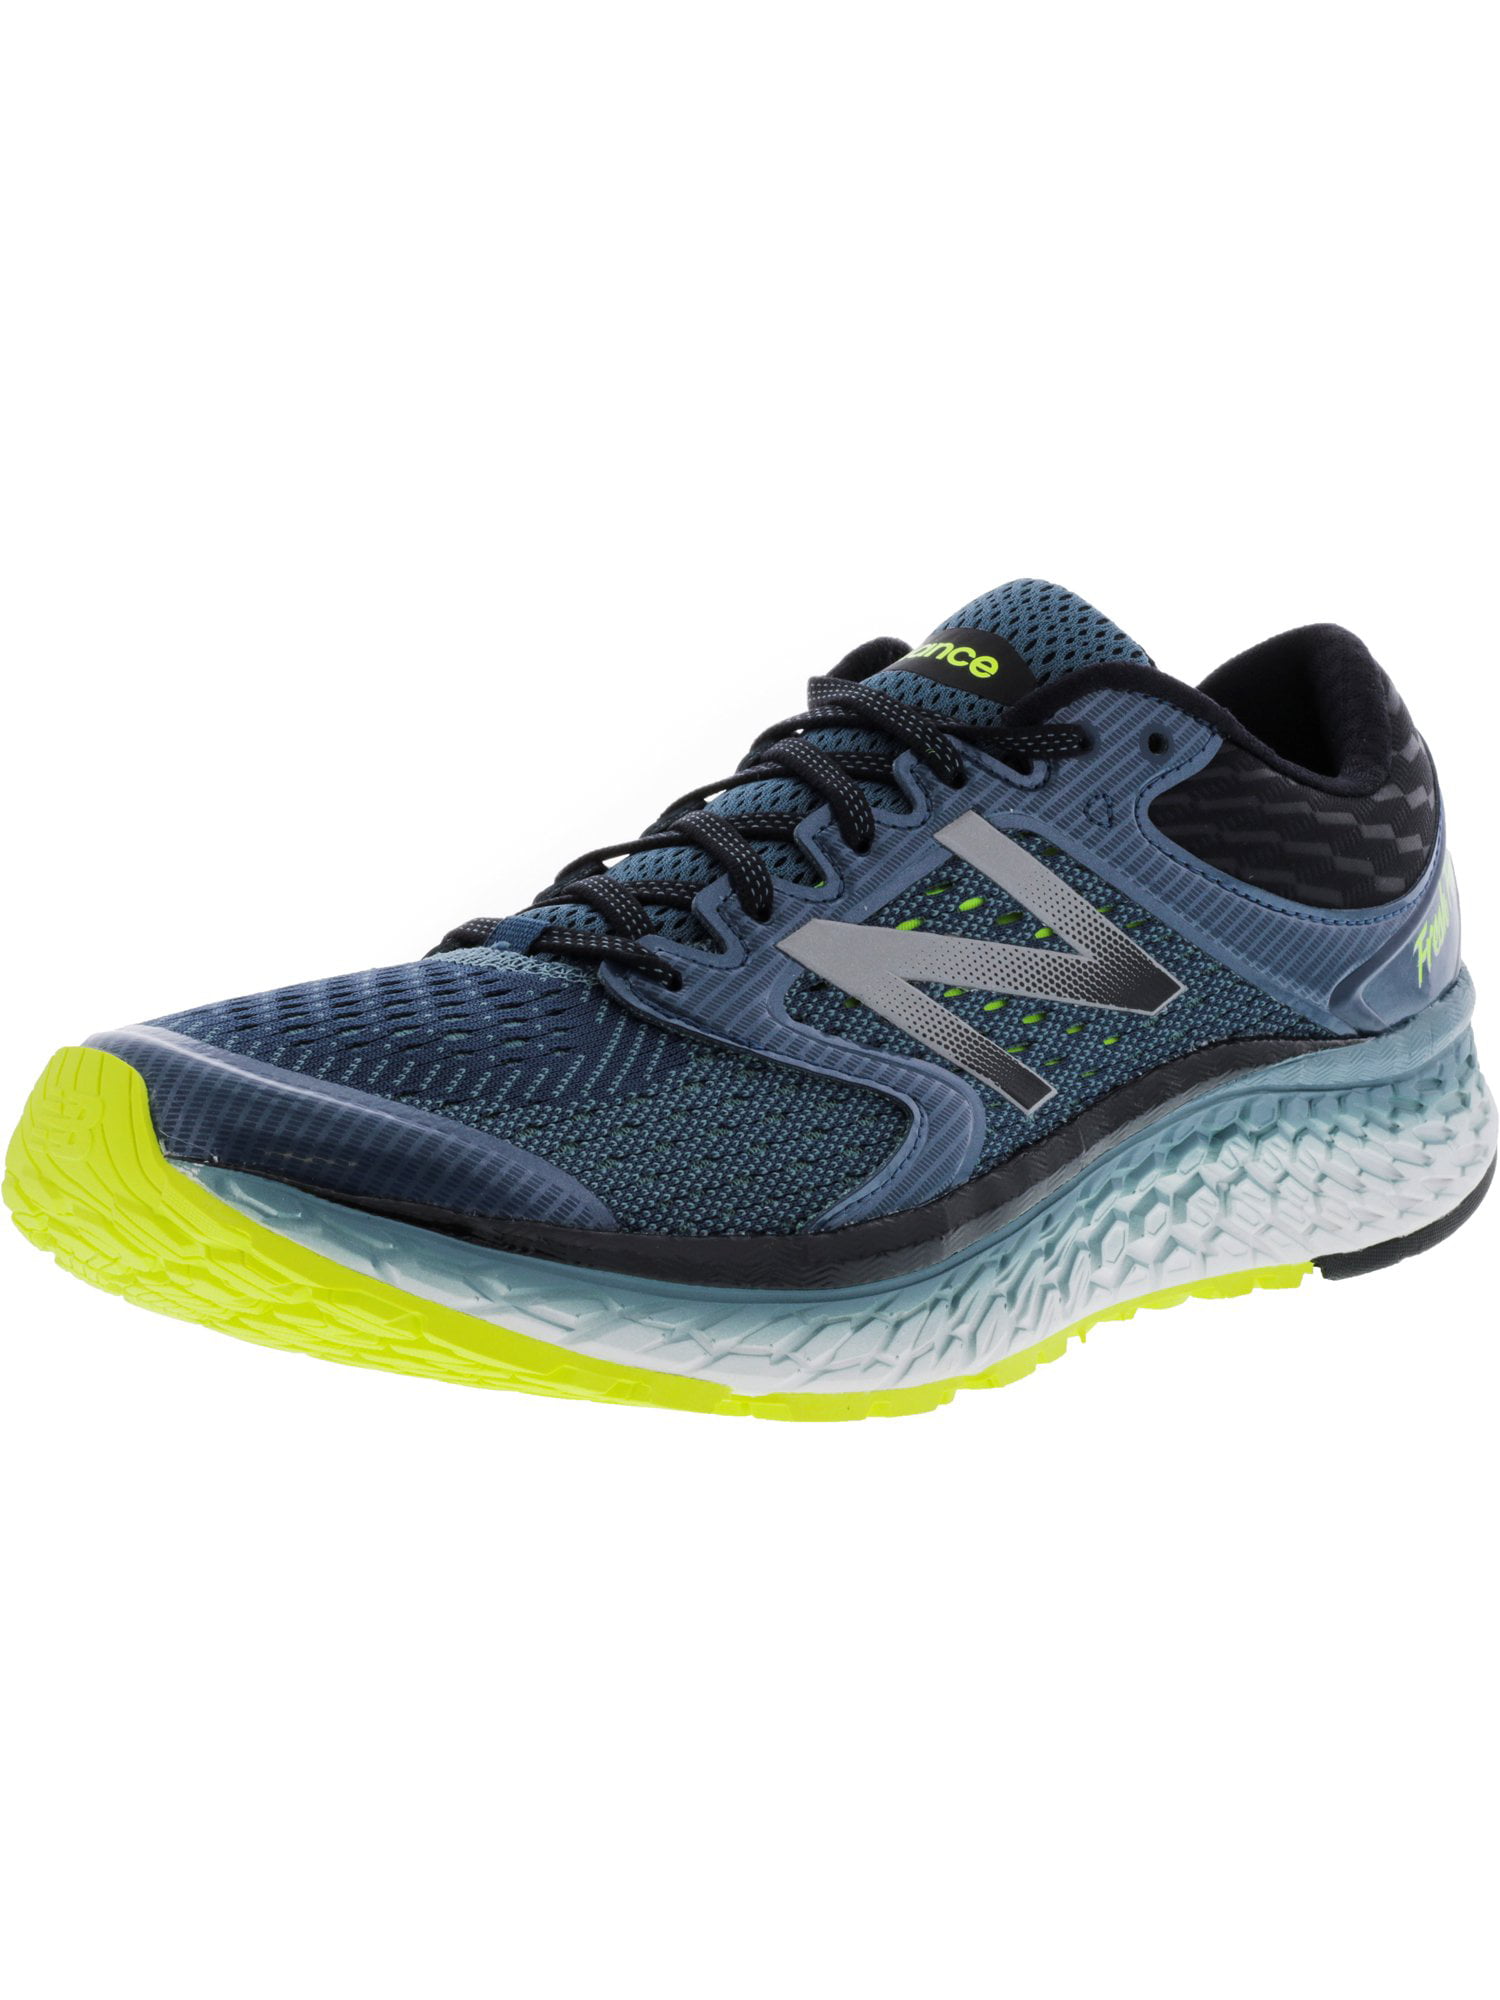 New Balance - New Balance Men's M1080 By7 Ankle-High Running Shoe ...